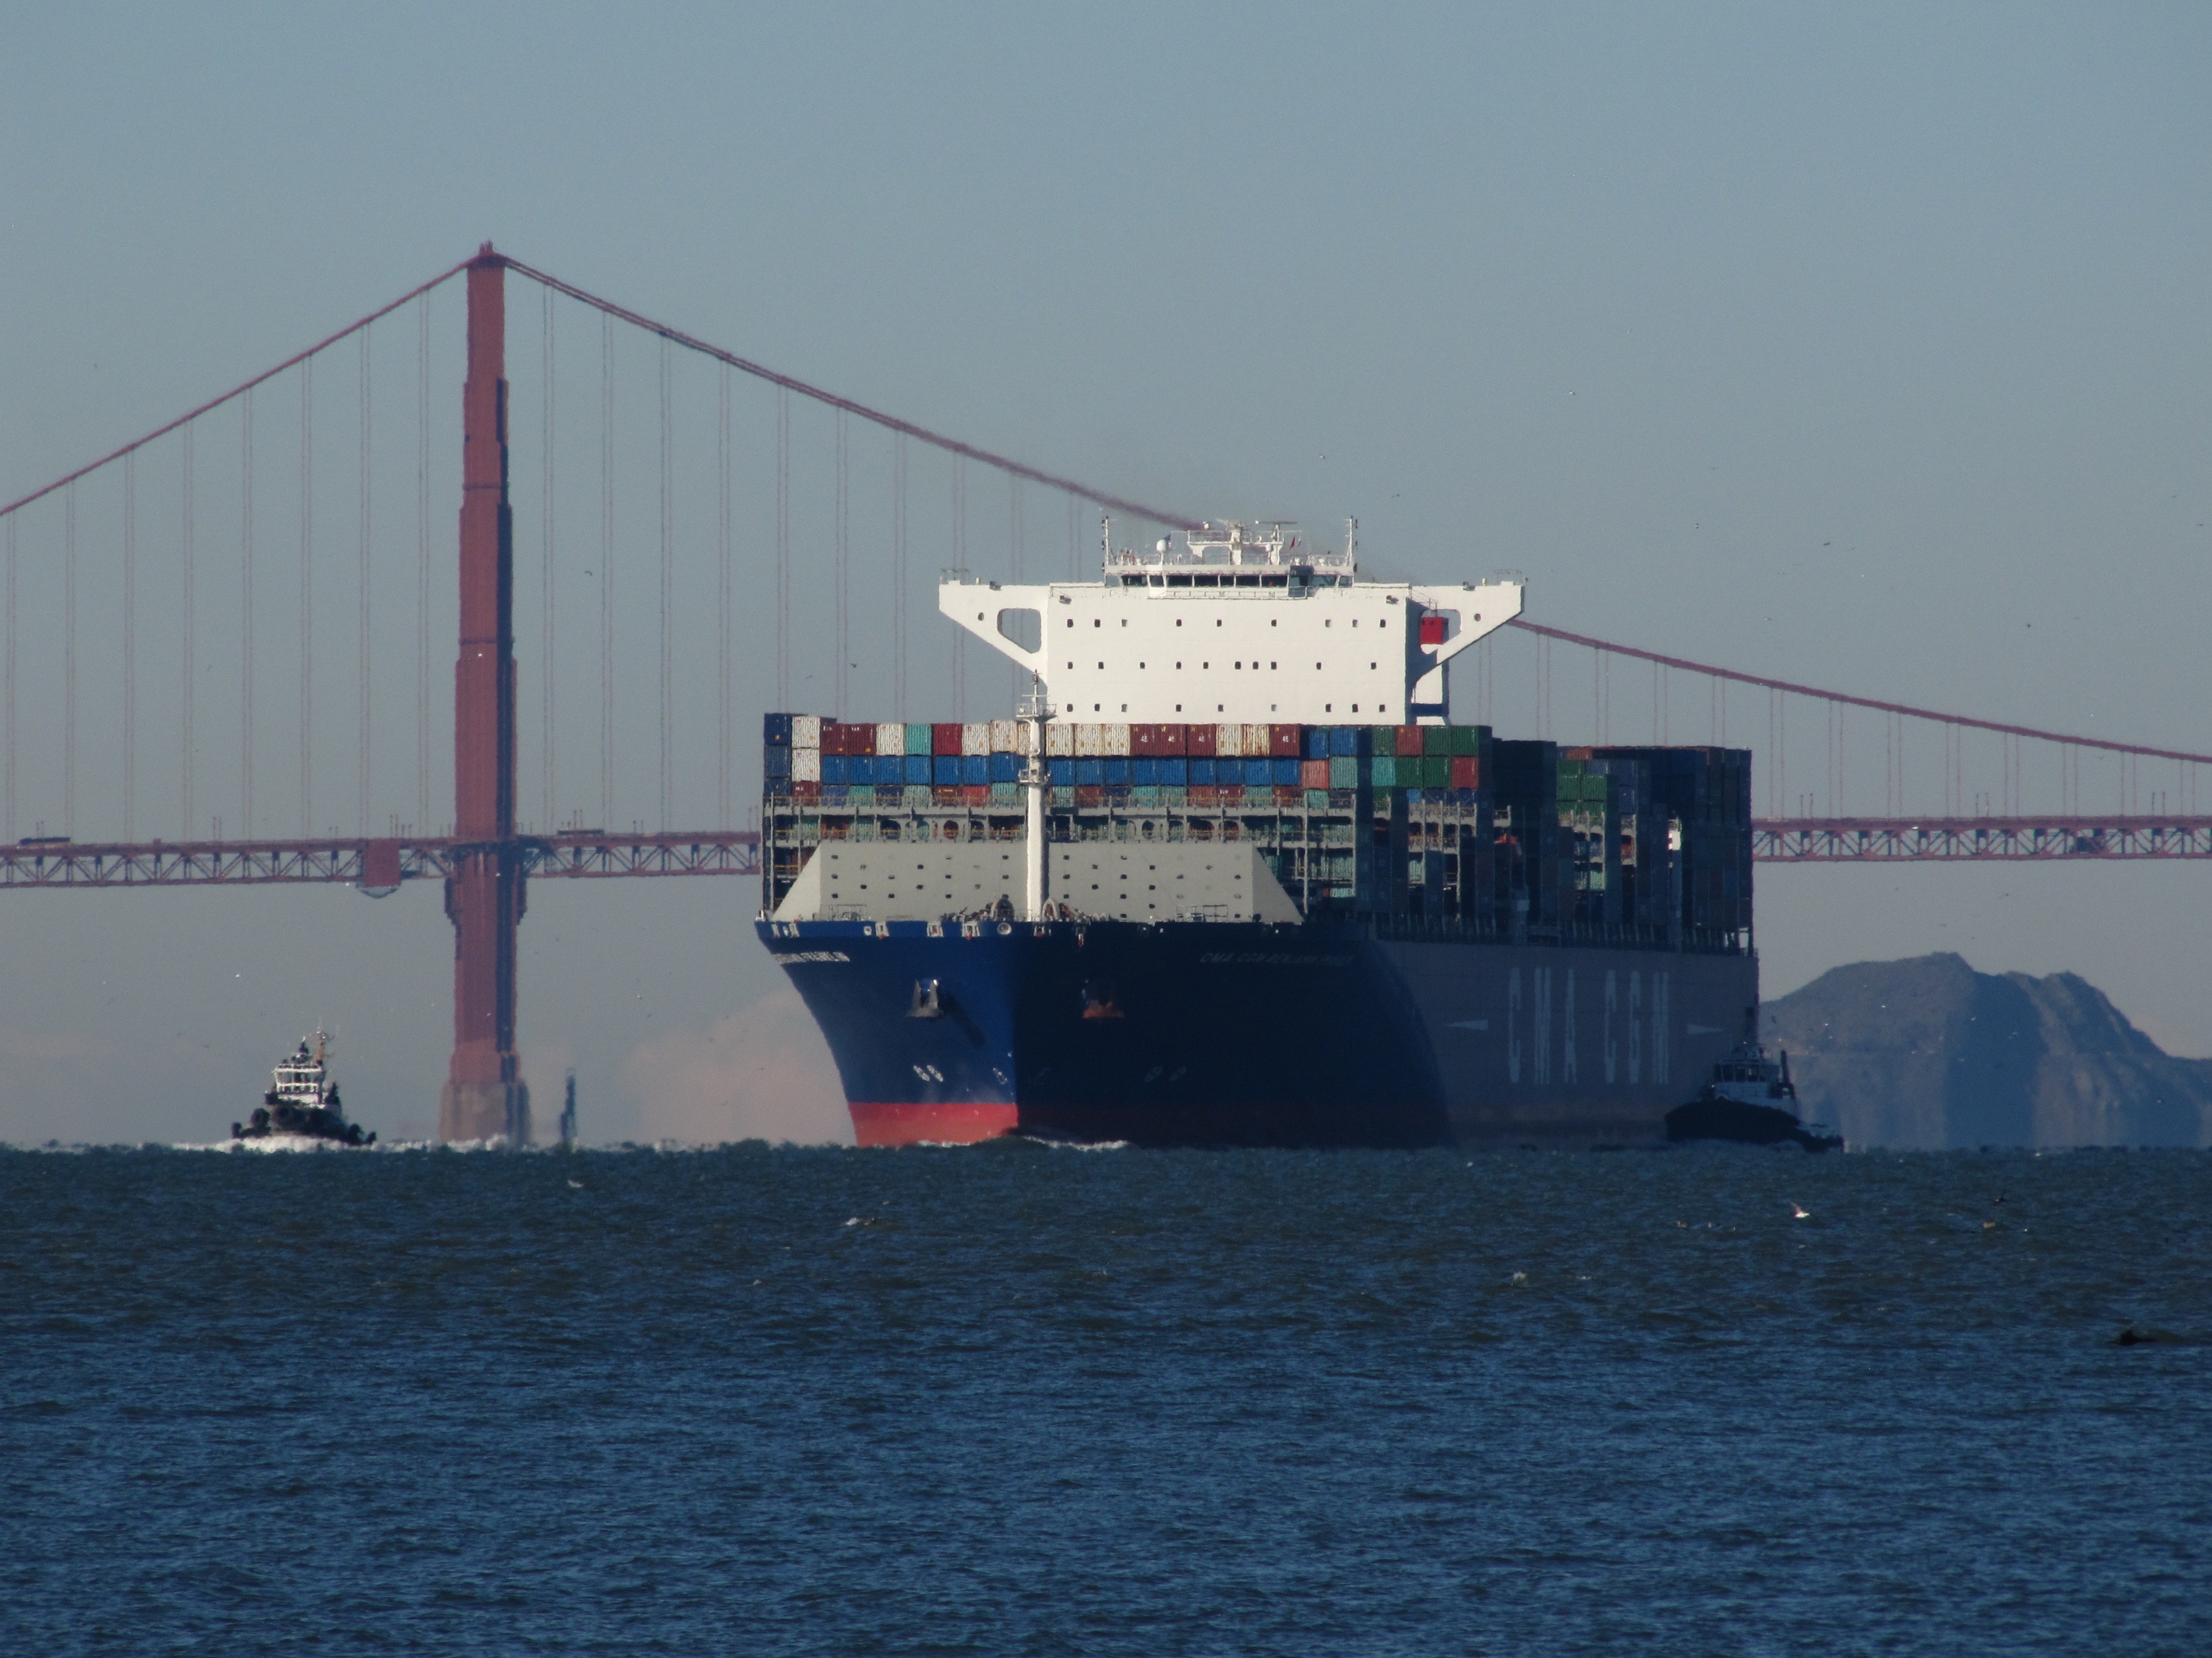 The Ultra-Large Container Ship Benjamin Franklin enters San Francisco Bay on December 31, 2015, the largest cargo ship ever to pass under the Golden Gate Bridge.